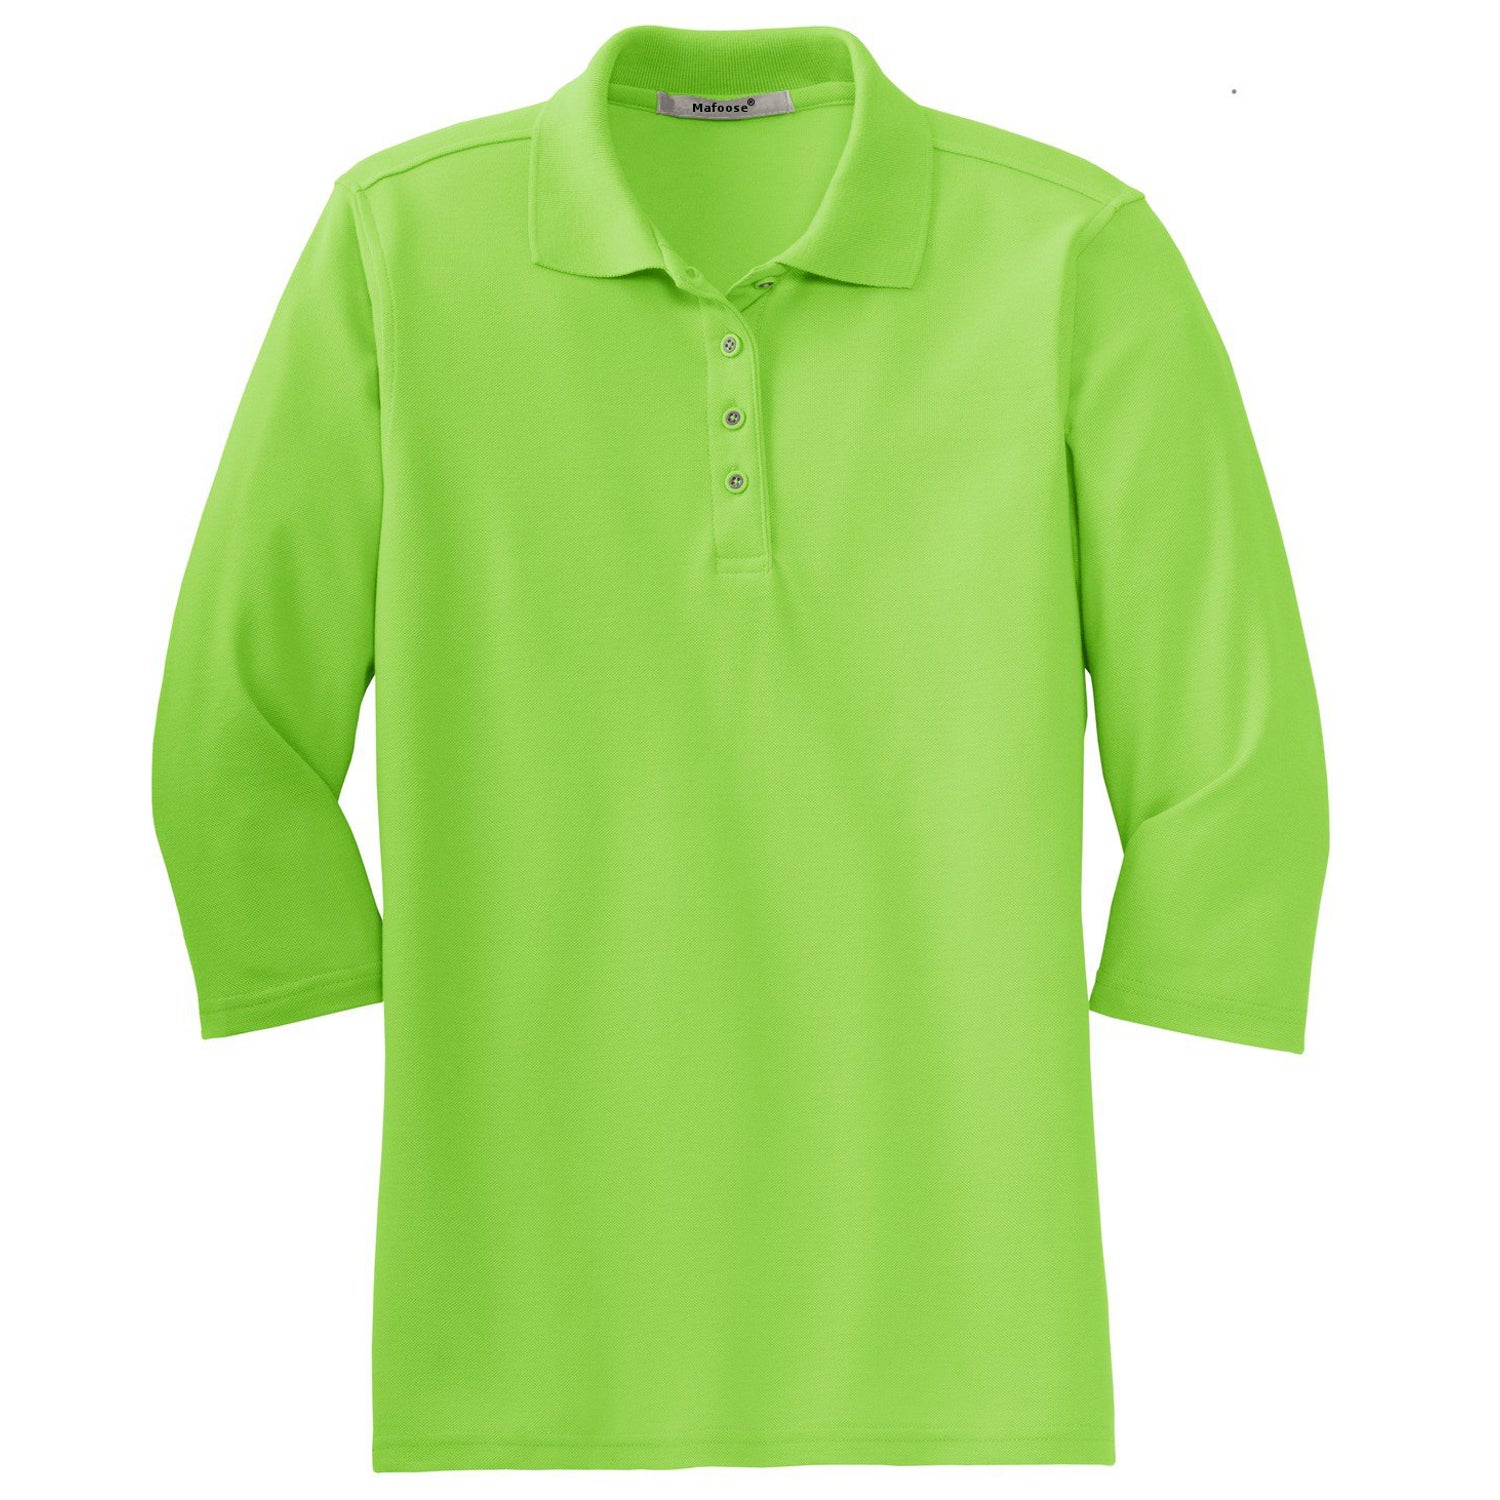 Mafoose Women's Silk Touch Ã‚Â¾ Sleeve Polo Shirt Lime-Front